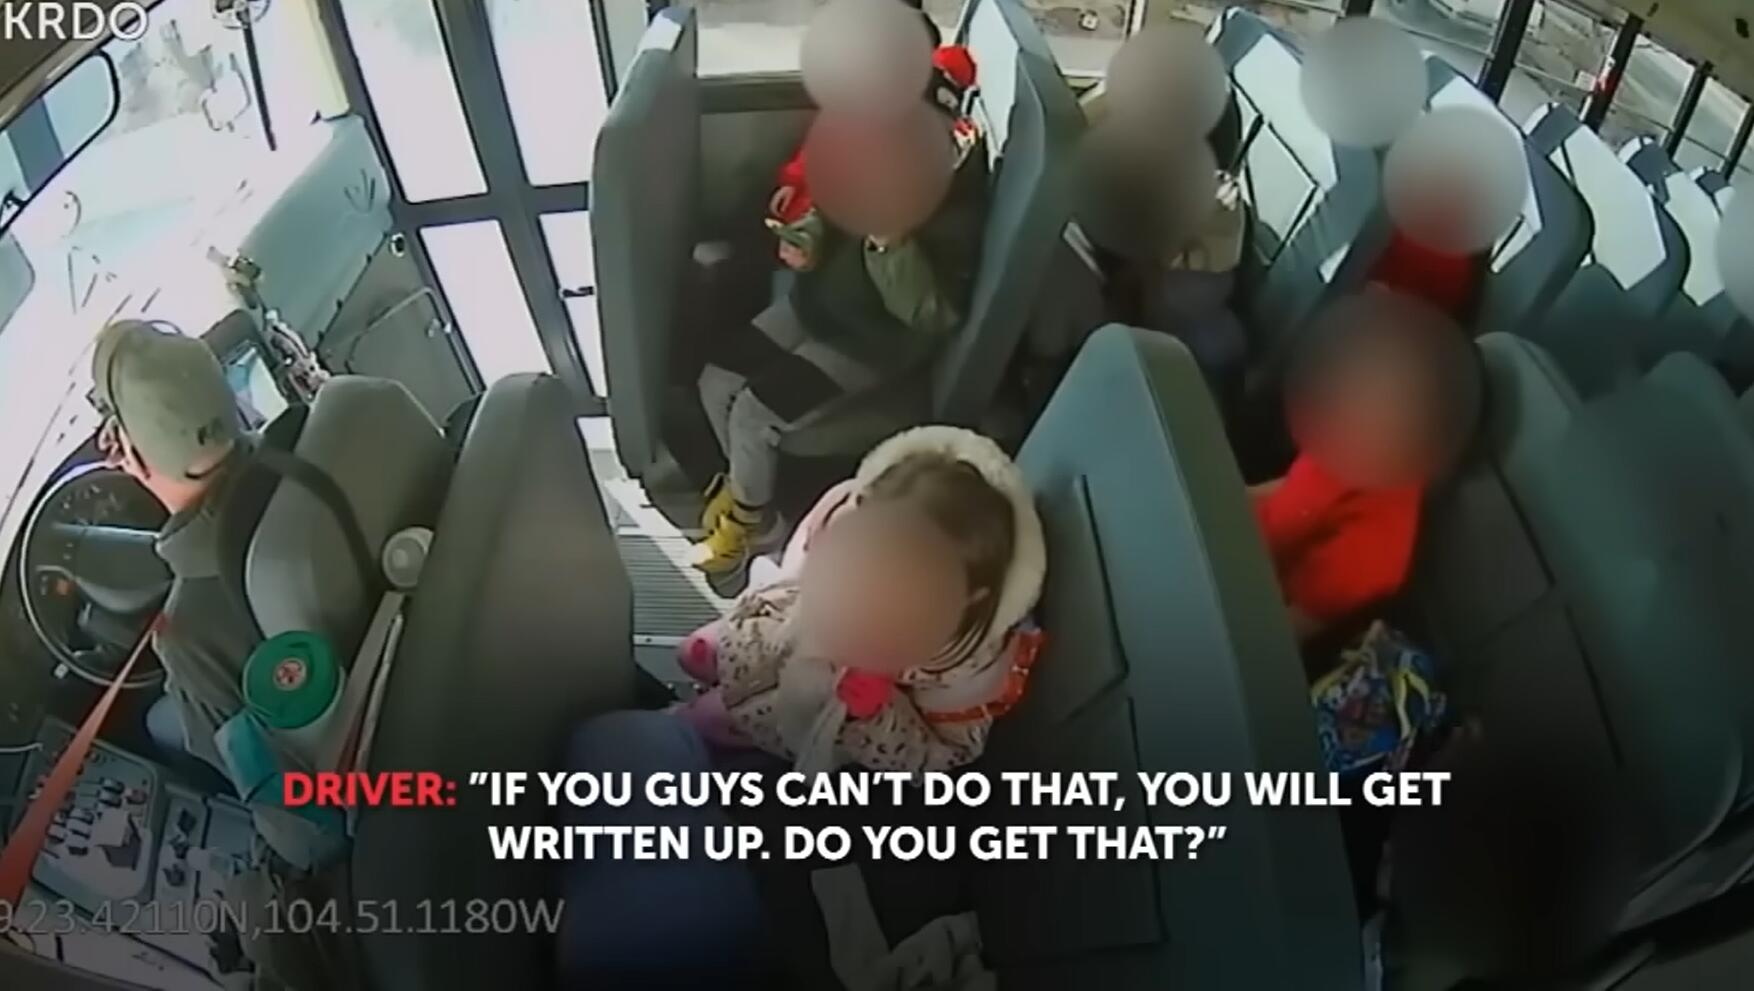 This Bus Driver Is Facing Charges For Doing This, Should He Be?